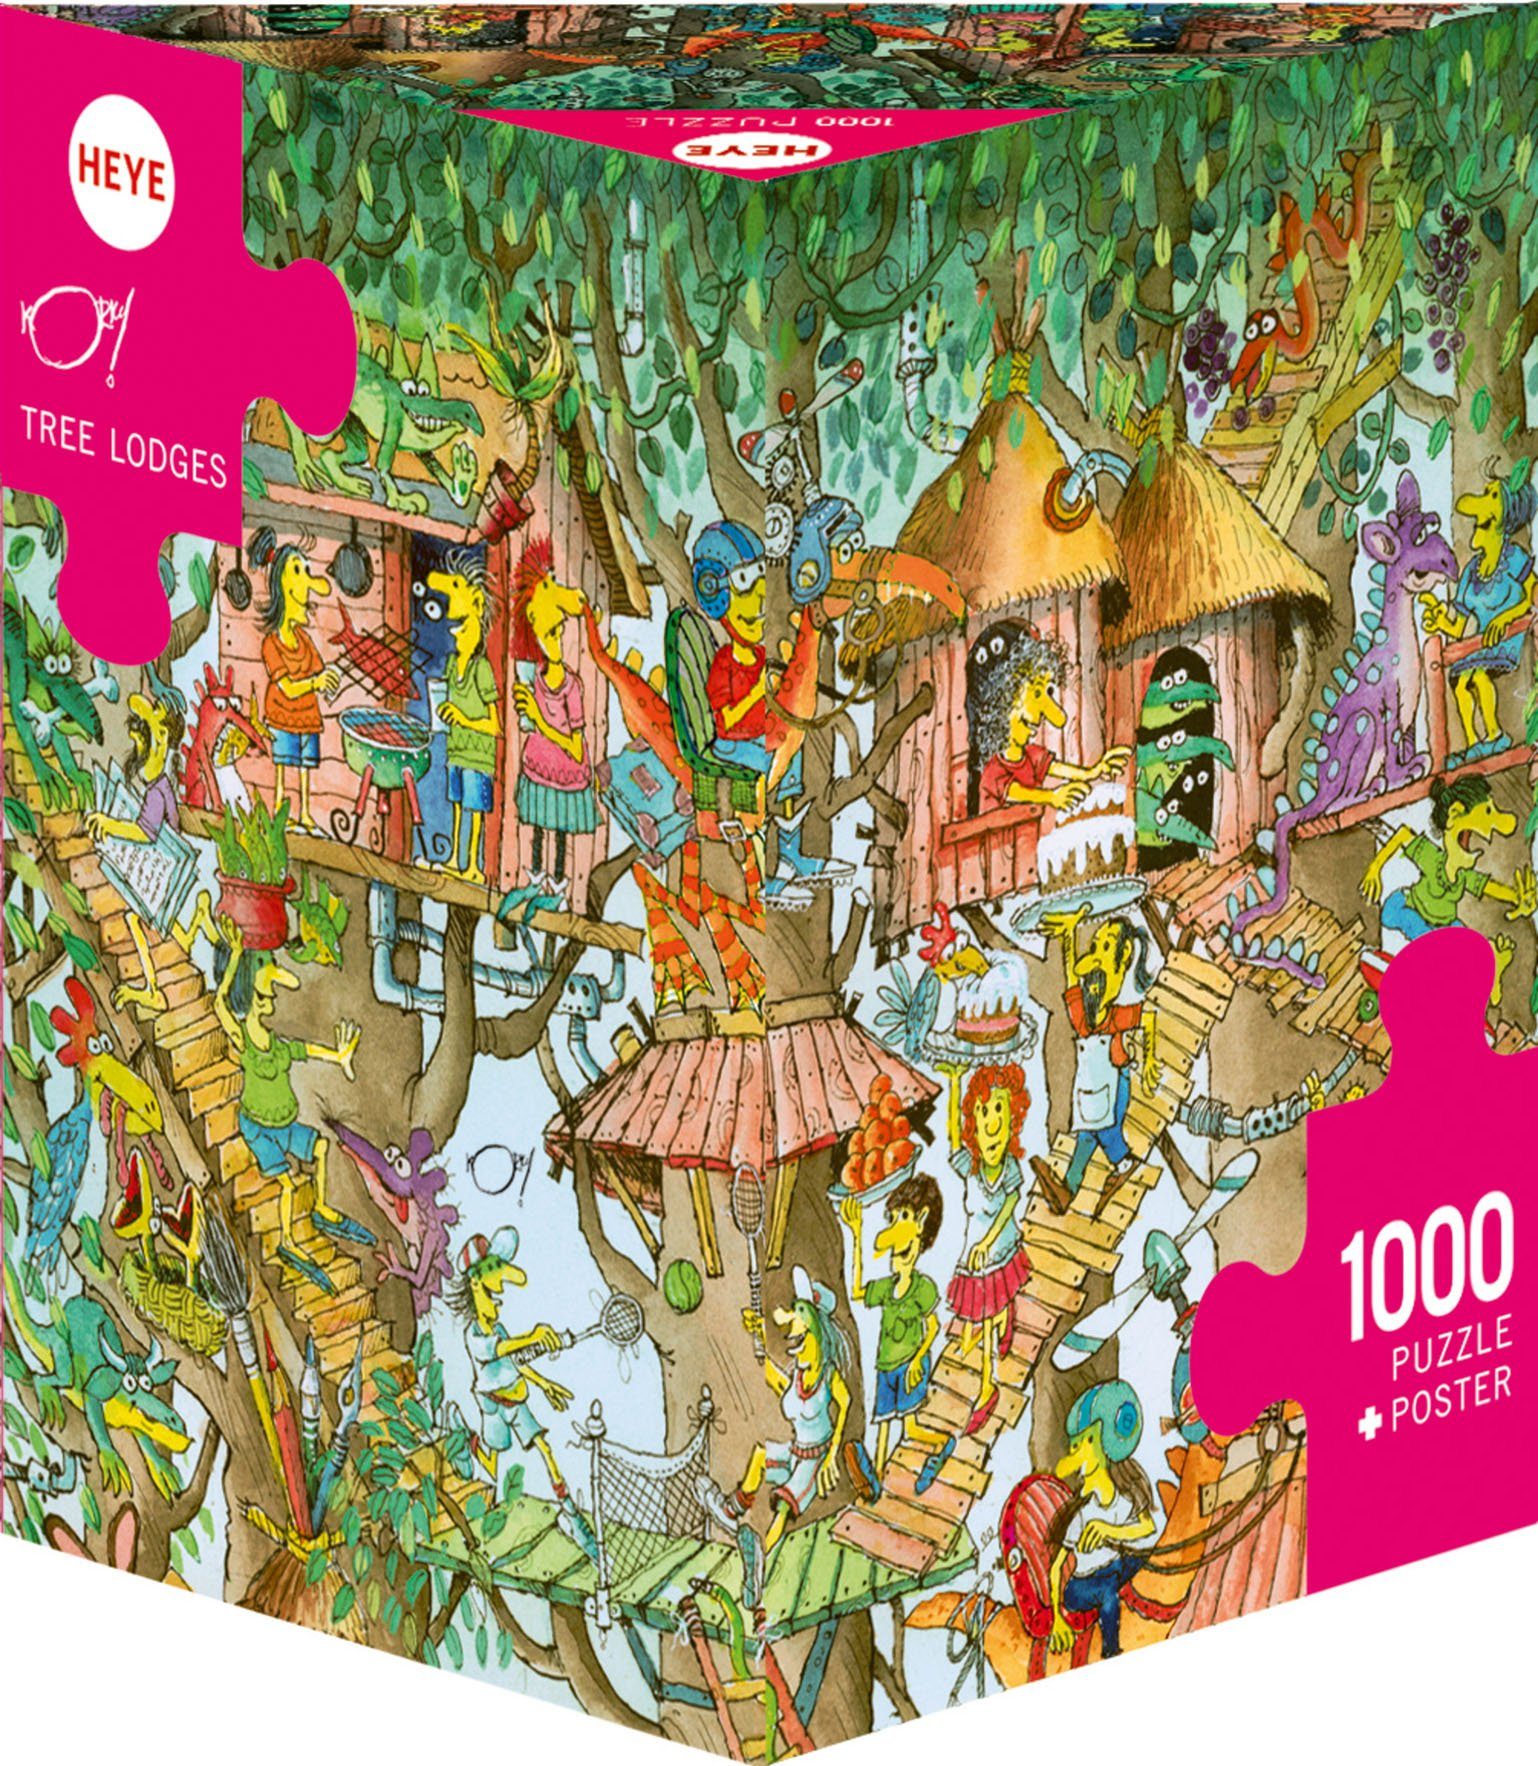 HEYE Puzzle Tree Lodges - Korky Paul, 1000 Puzzleteile, Made in Europe